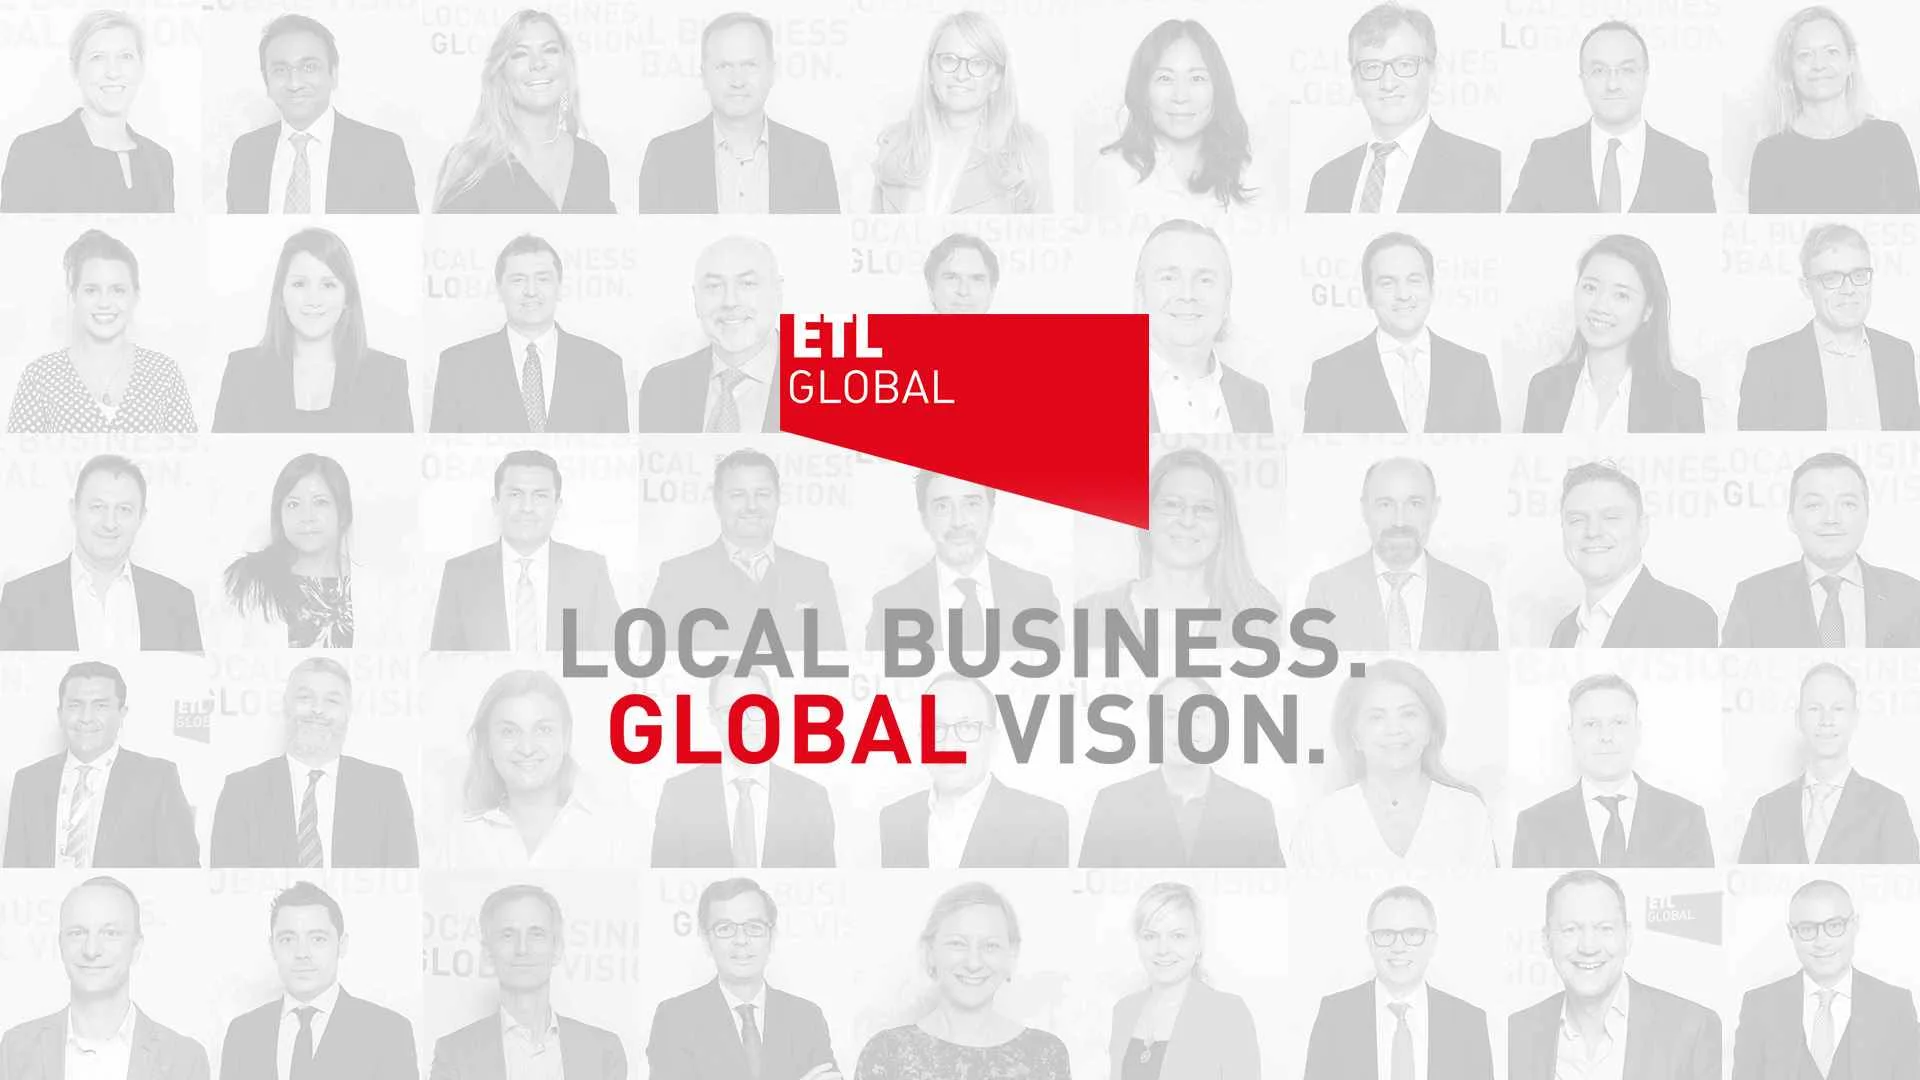 1st ETL GLOBAL Online Conference, with more than 250 participants from 32 different countries.